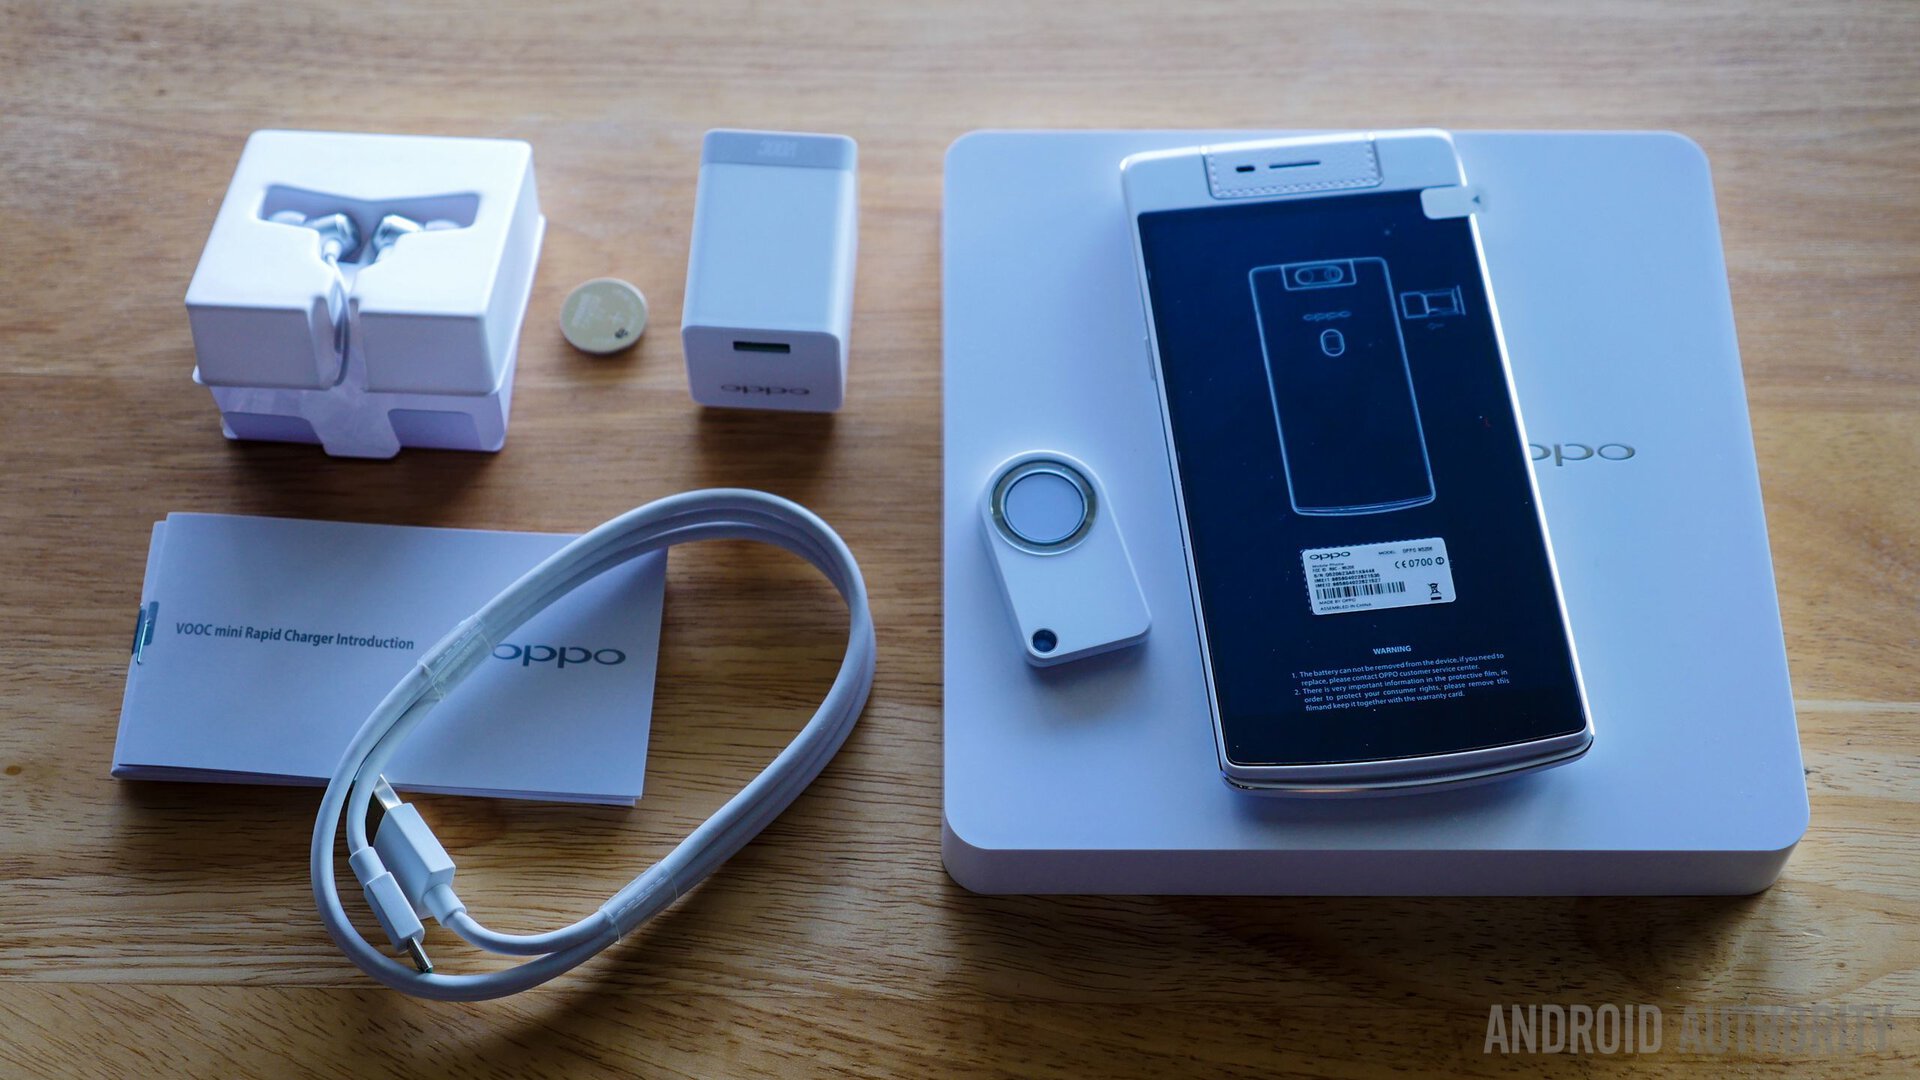 oppo n3 unboxing and first impressions aa (1 of 31)